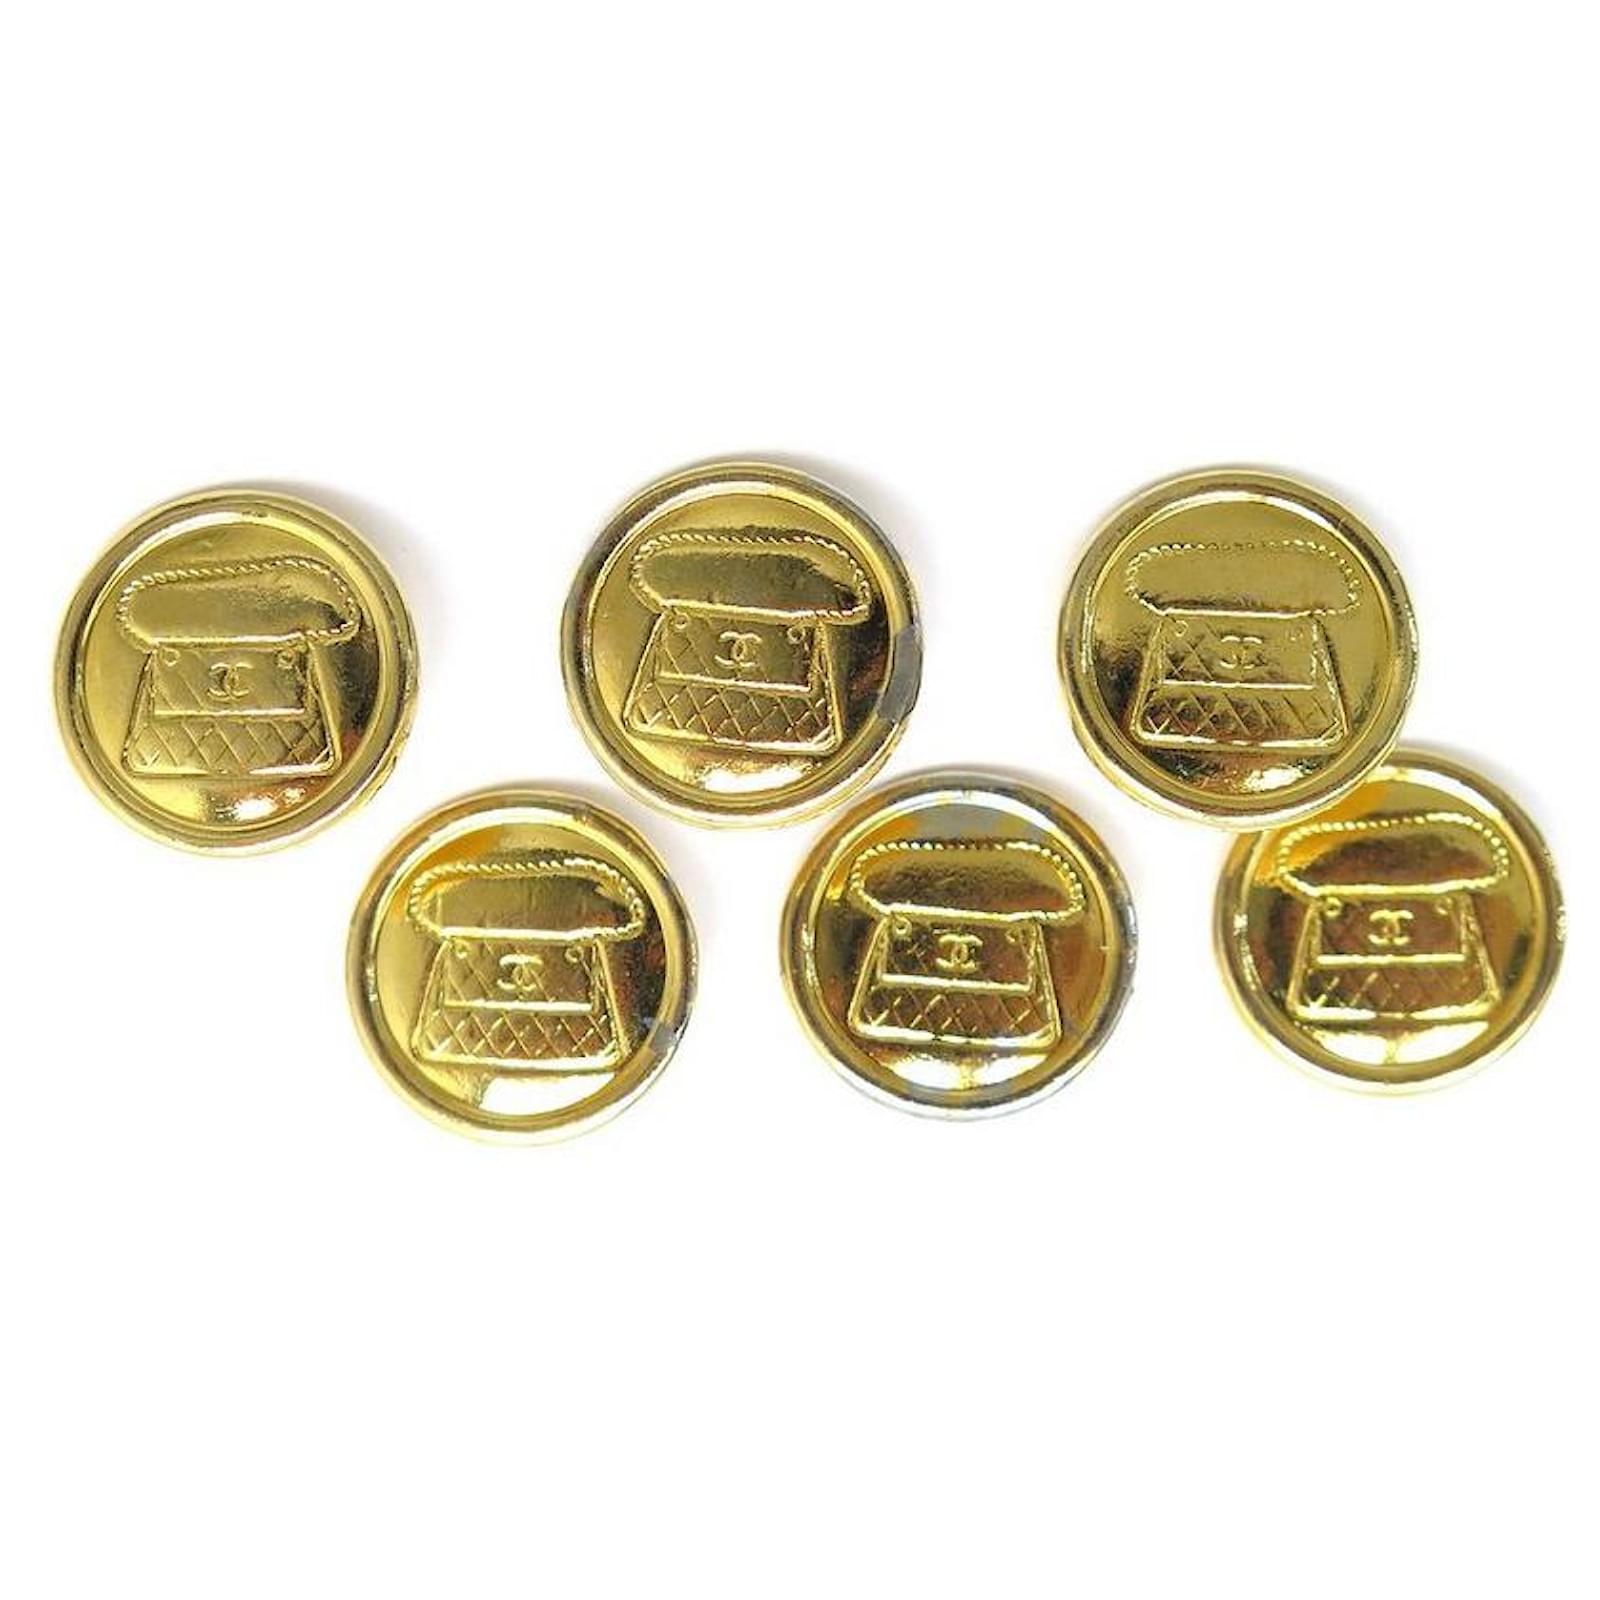 AUTHENTIC!! Lot Of 2 CHANEL Vintage Buttons Gold CC Logo